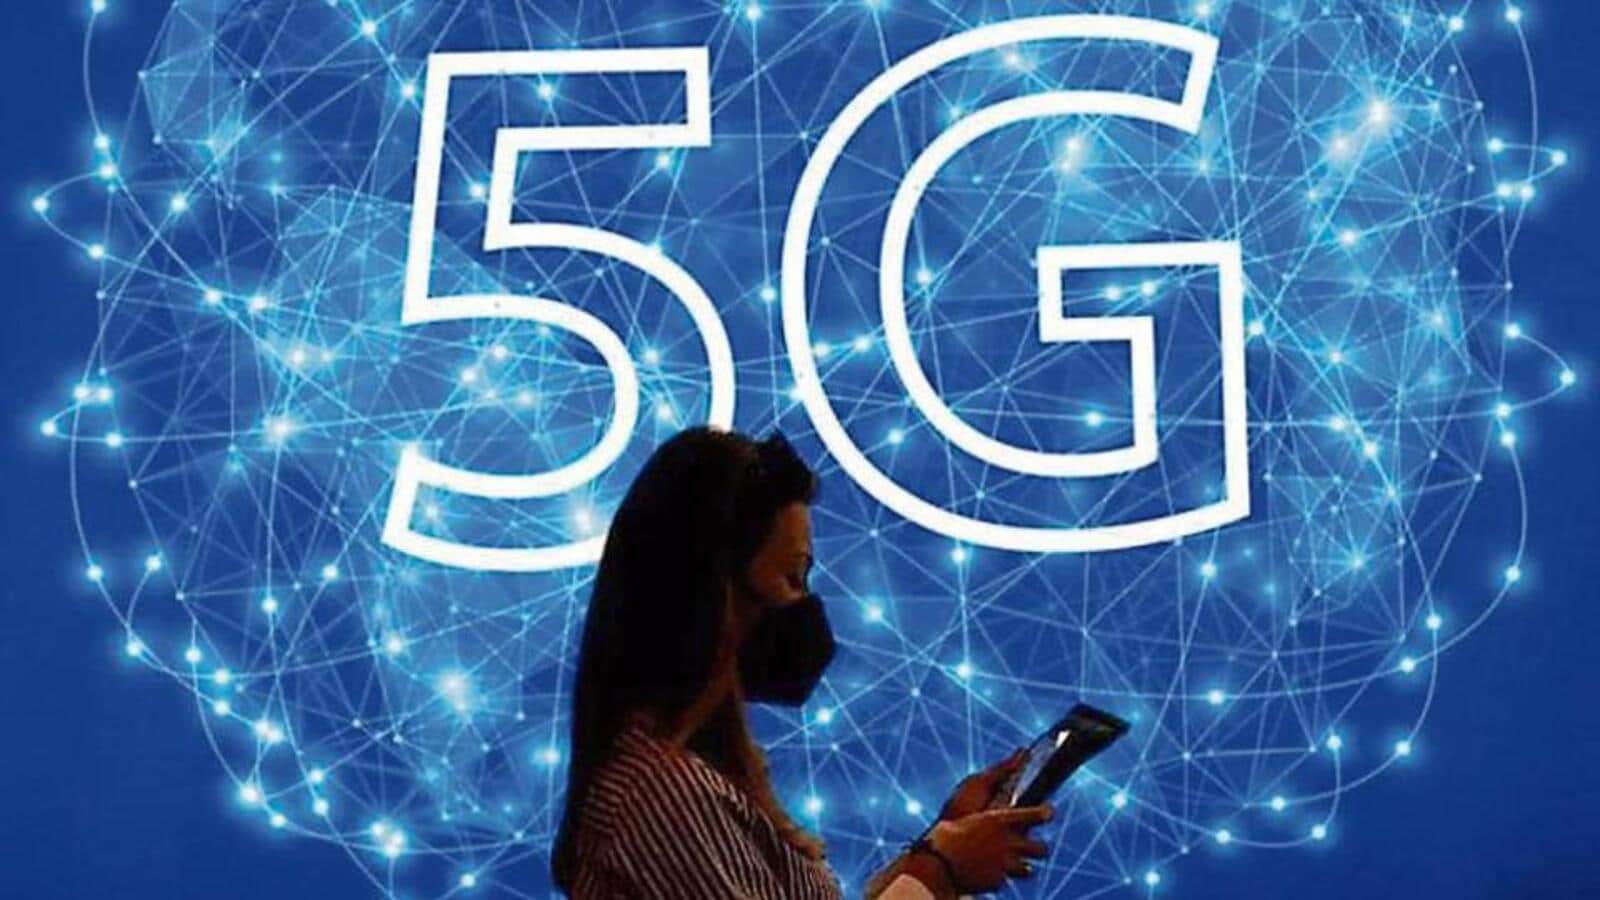 9 Best Tips for Getting the Most Out of 5G in 2023